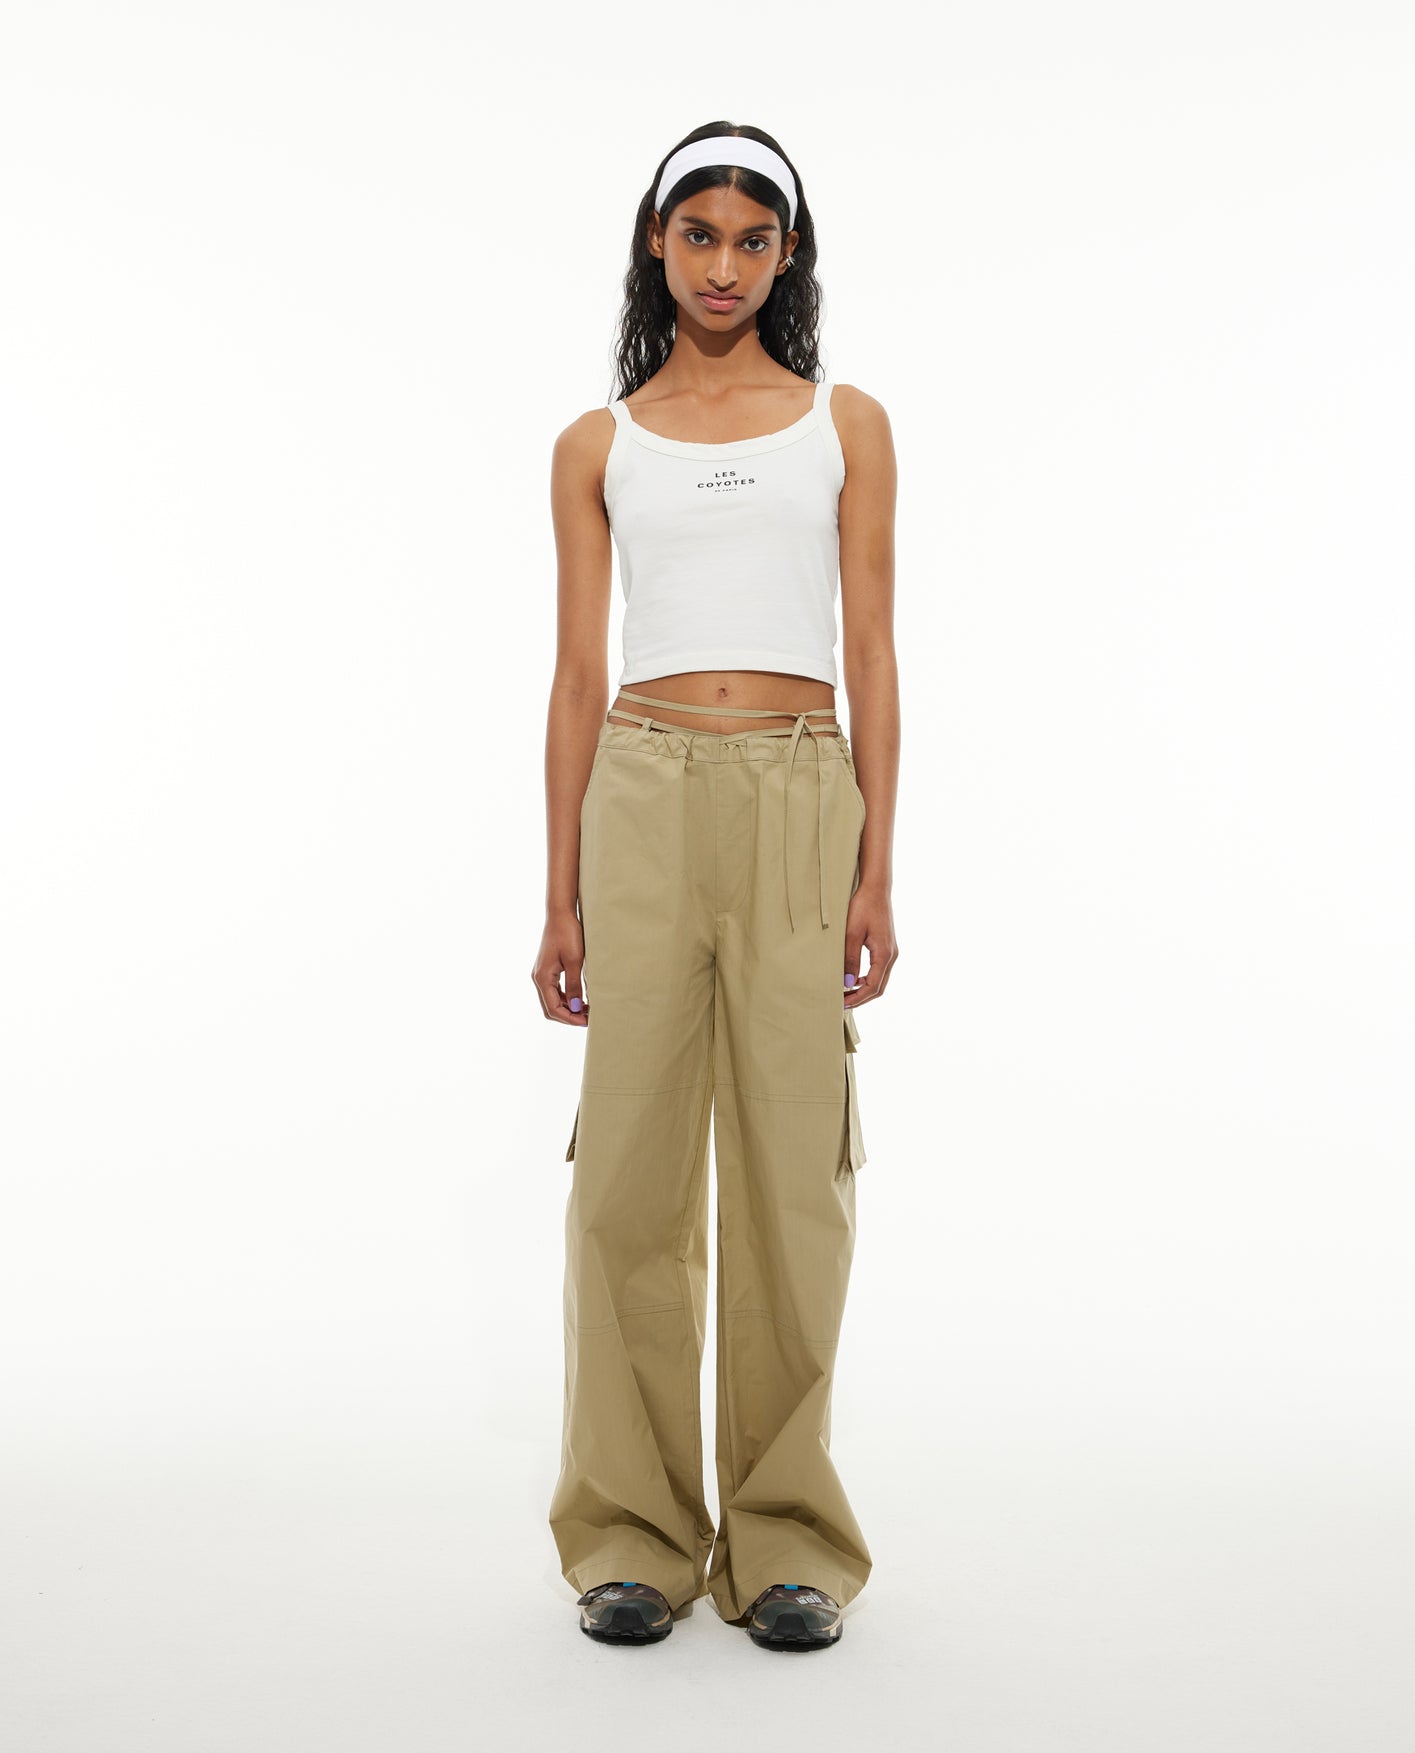 CARGO PANTS TROUSERS